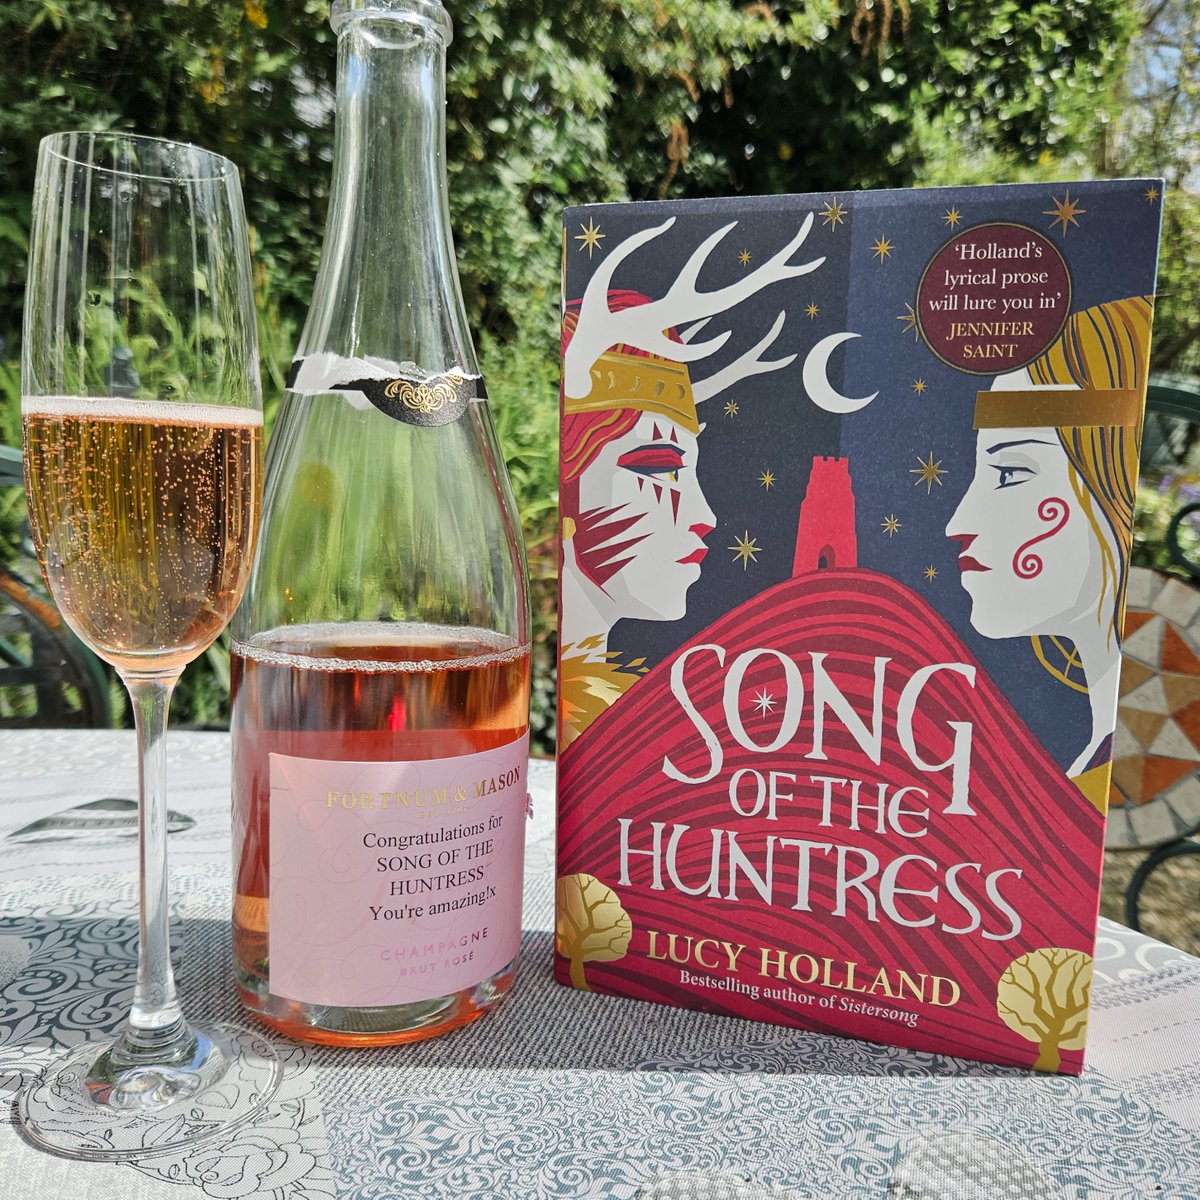 Celebrating one month of SONG OF THE HUNTRESS! Thank you to everyone who bought and read the book, came to my events and shared their reviews - couldn't do it without you! Here's to many more stories 🍾🥳